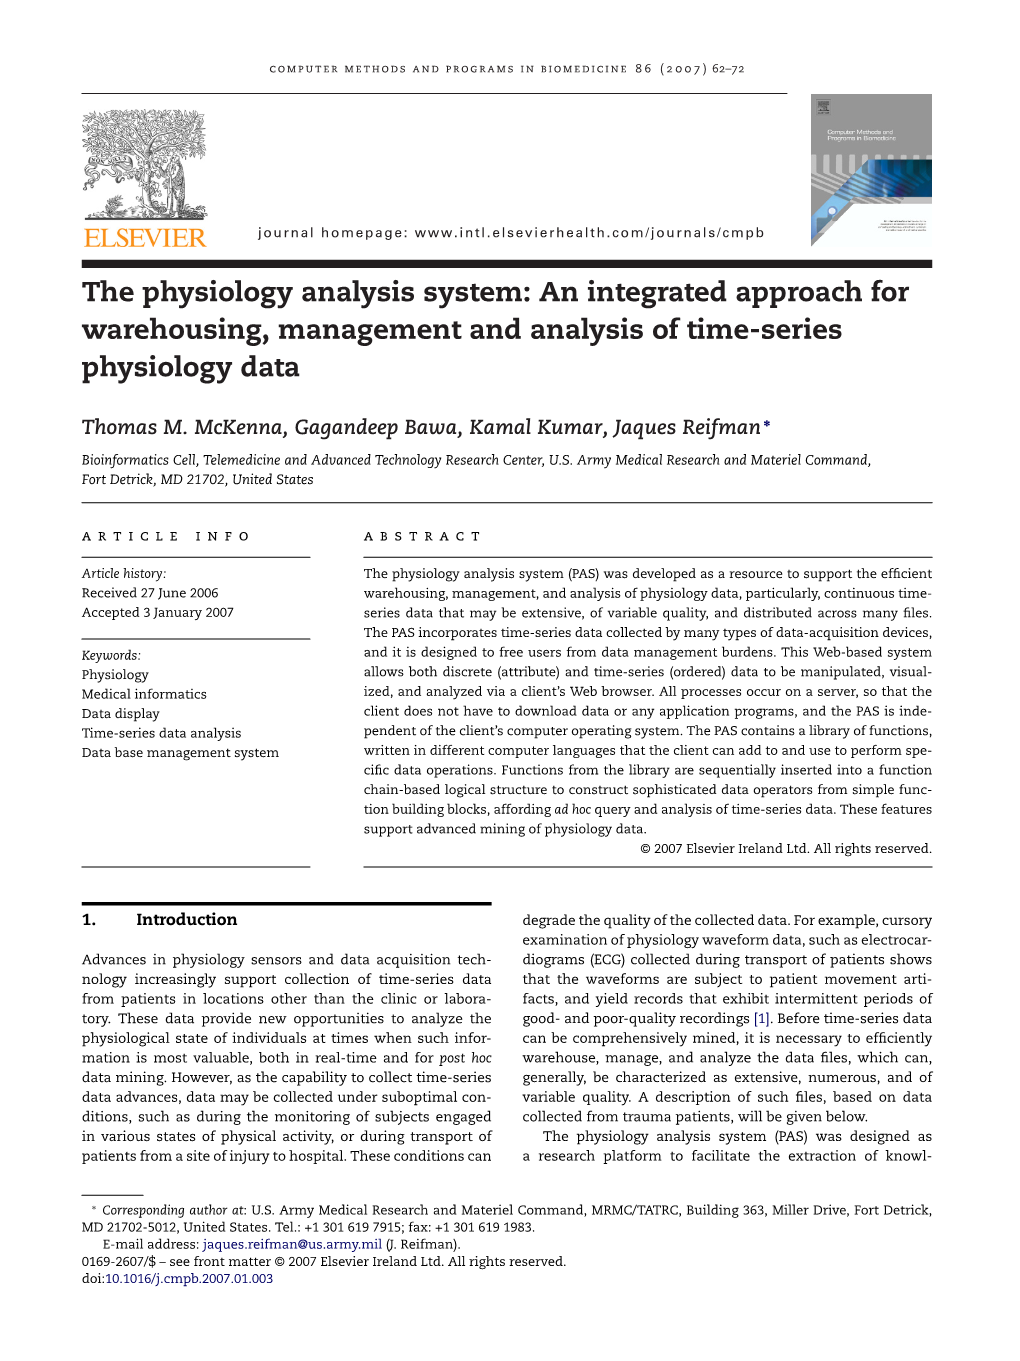 The Physiology Analysis System: an Integrated Approach for Warehousing, Management and Analysis of Time-Series Physiology Data